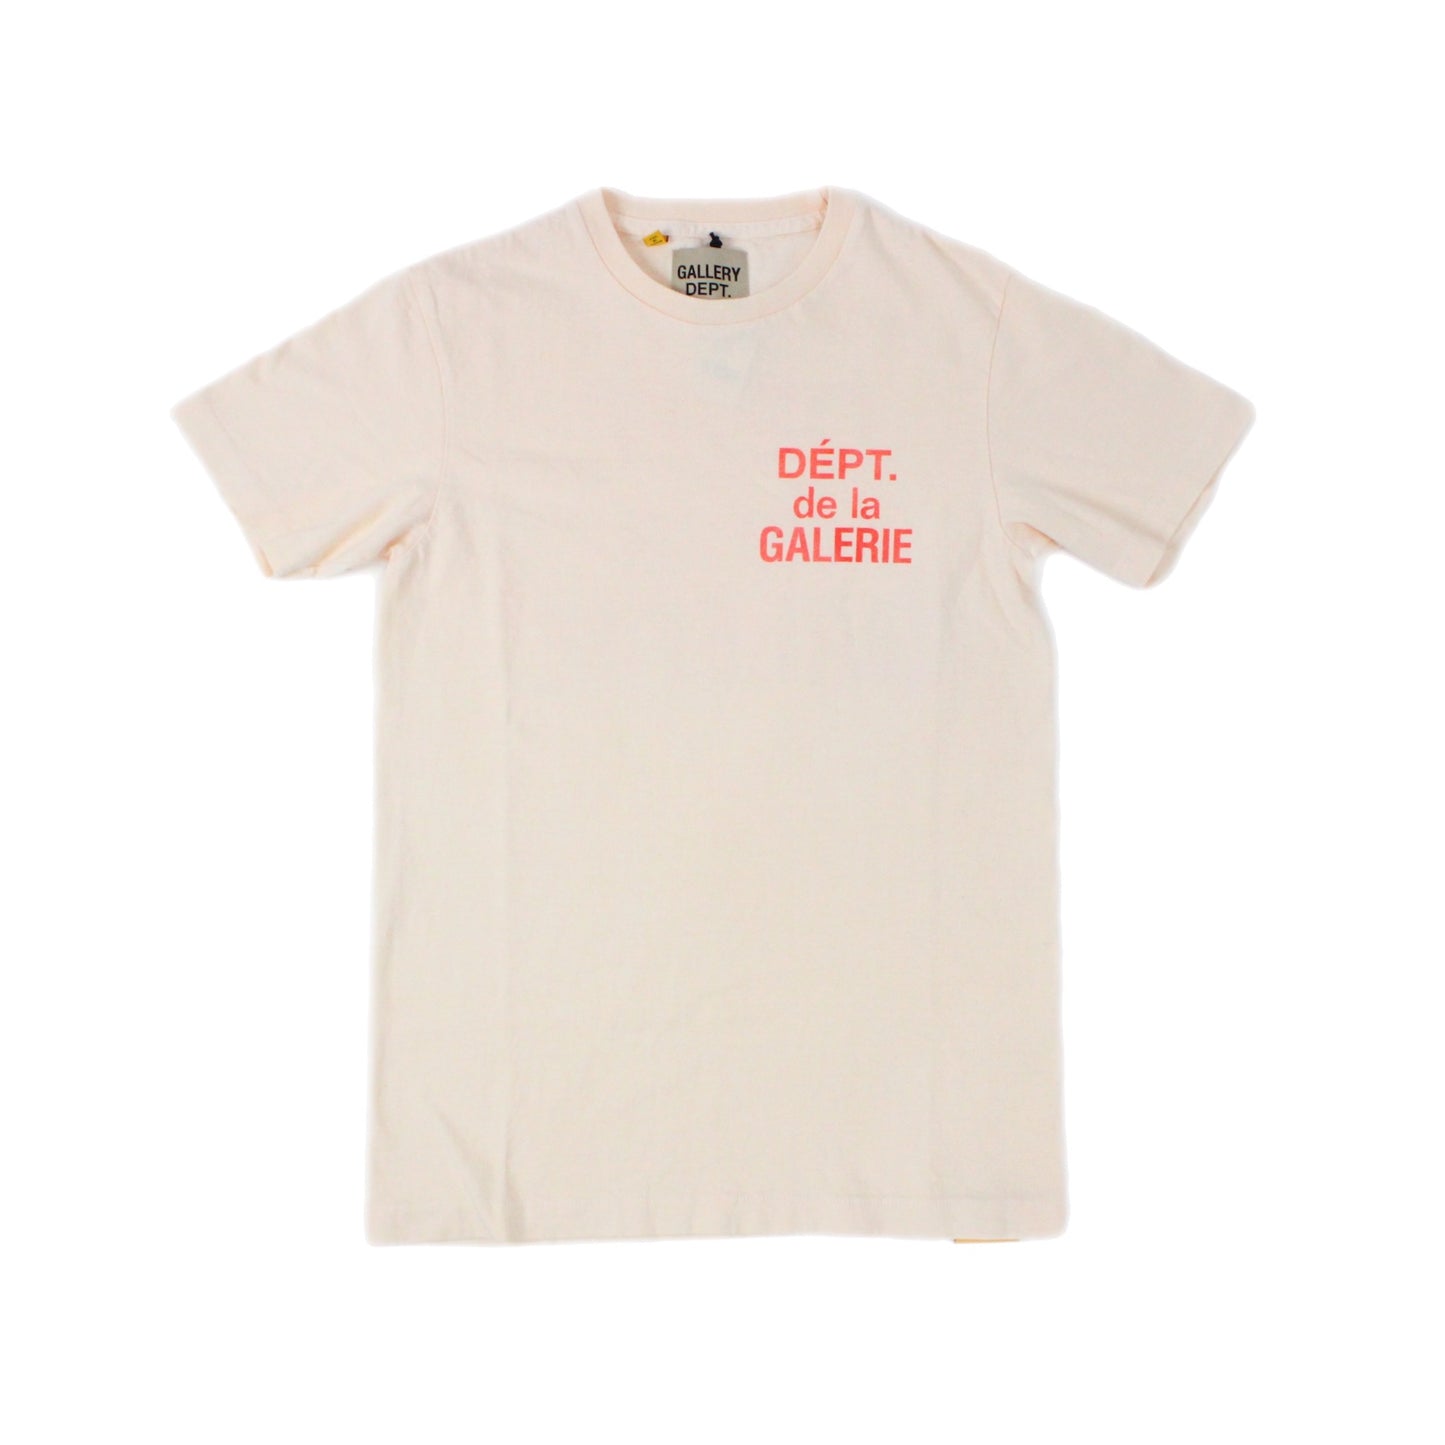 Gallery Dept. French Tee Cream and Red